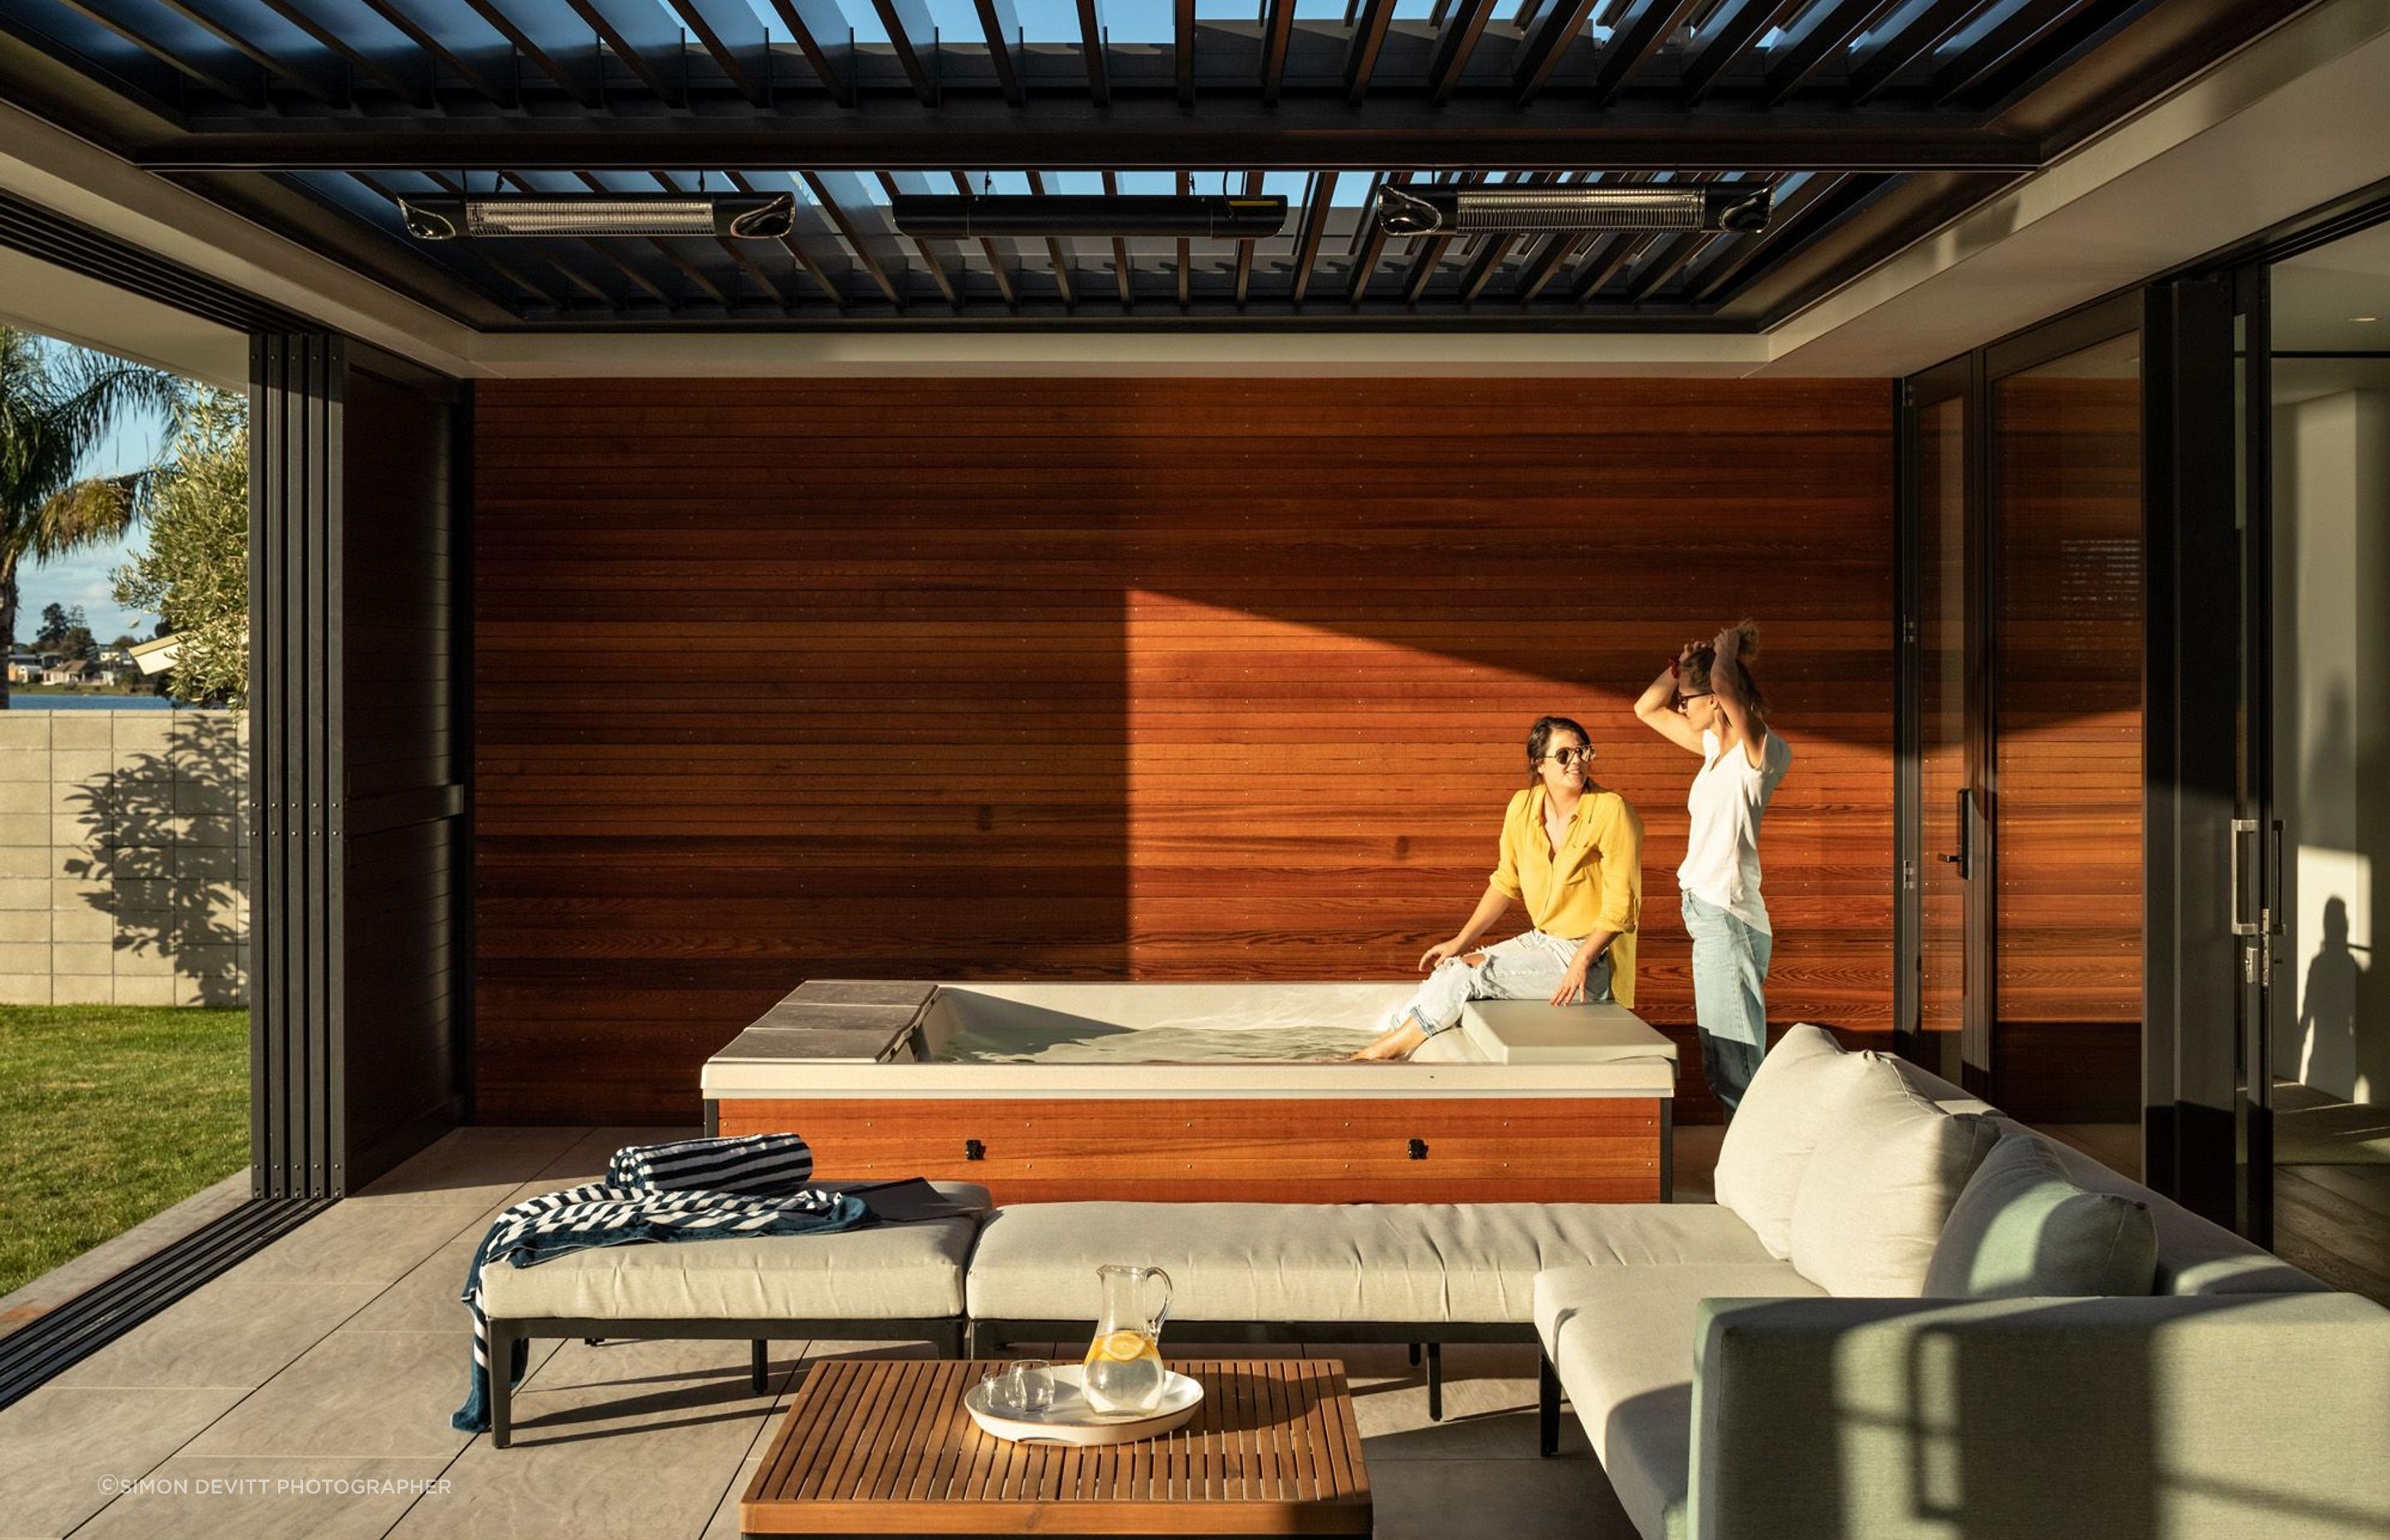 The outdoor room features a spa pool and a roof that opens up to the elements.